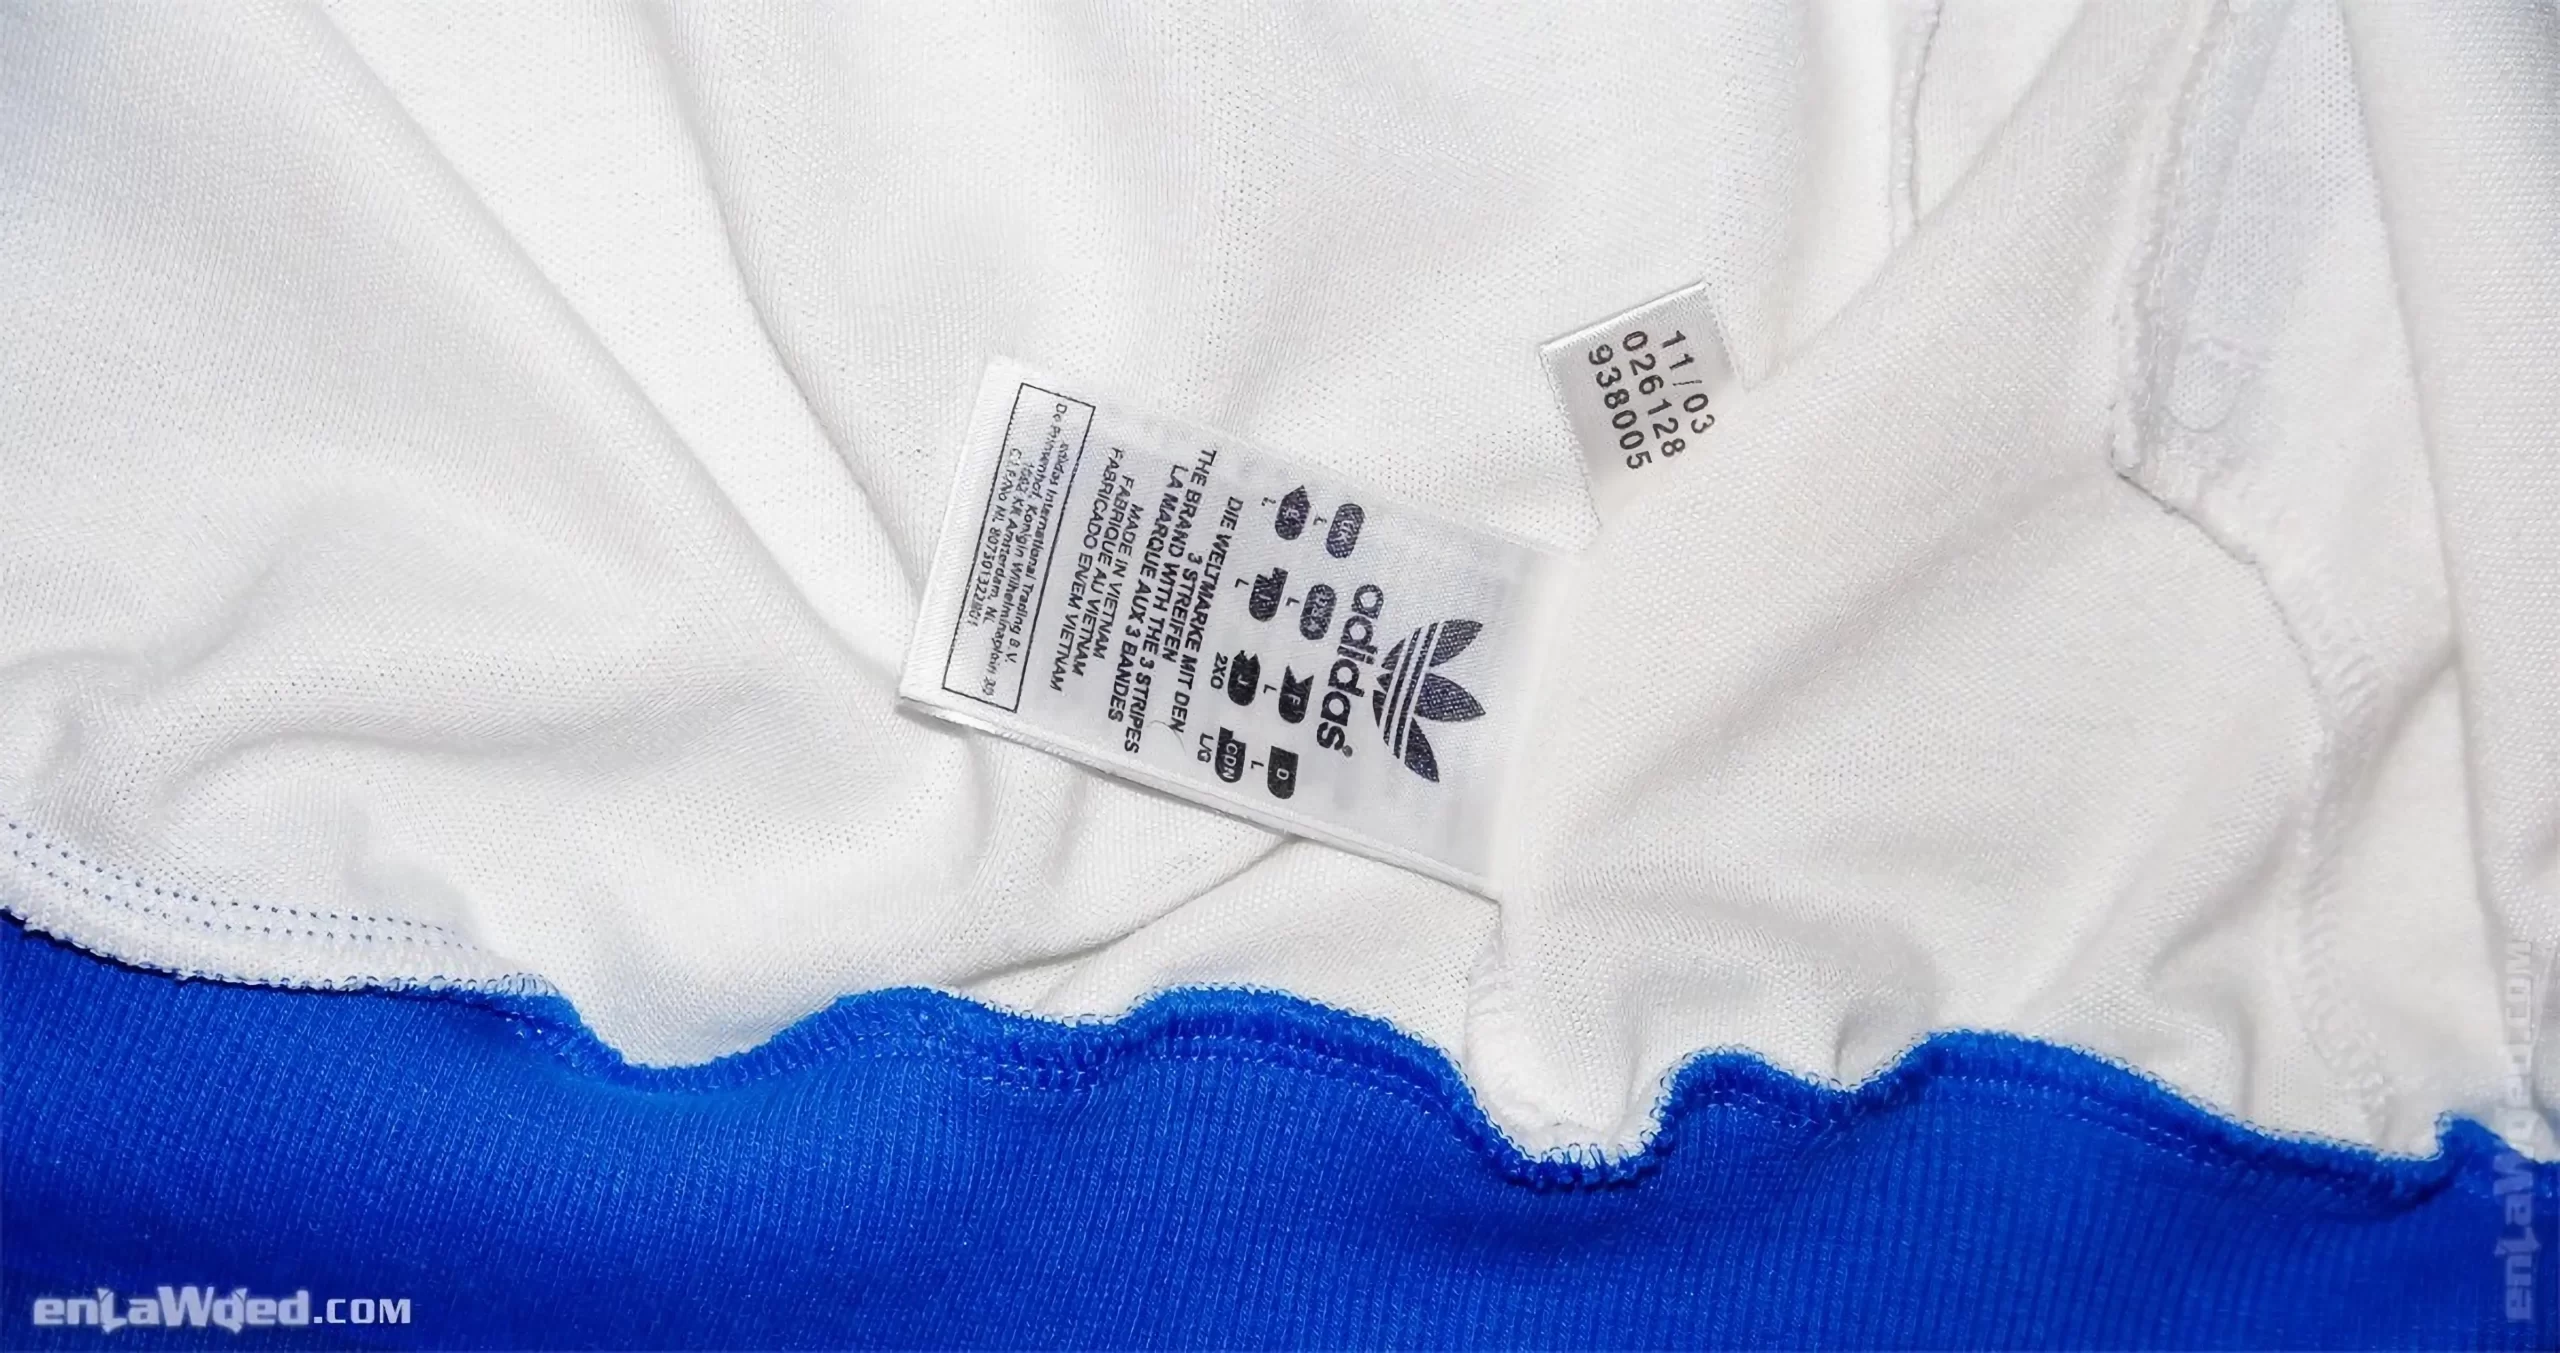 Men’s 2003 Greece Track Top by Adidas: Natural (EnLawded.com file #lmch4qjw6ulltdbntgn)